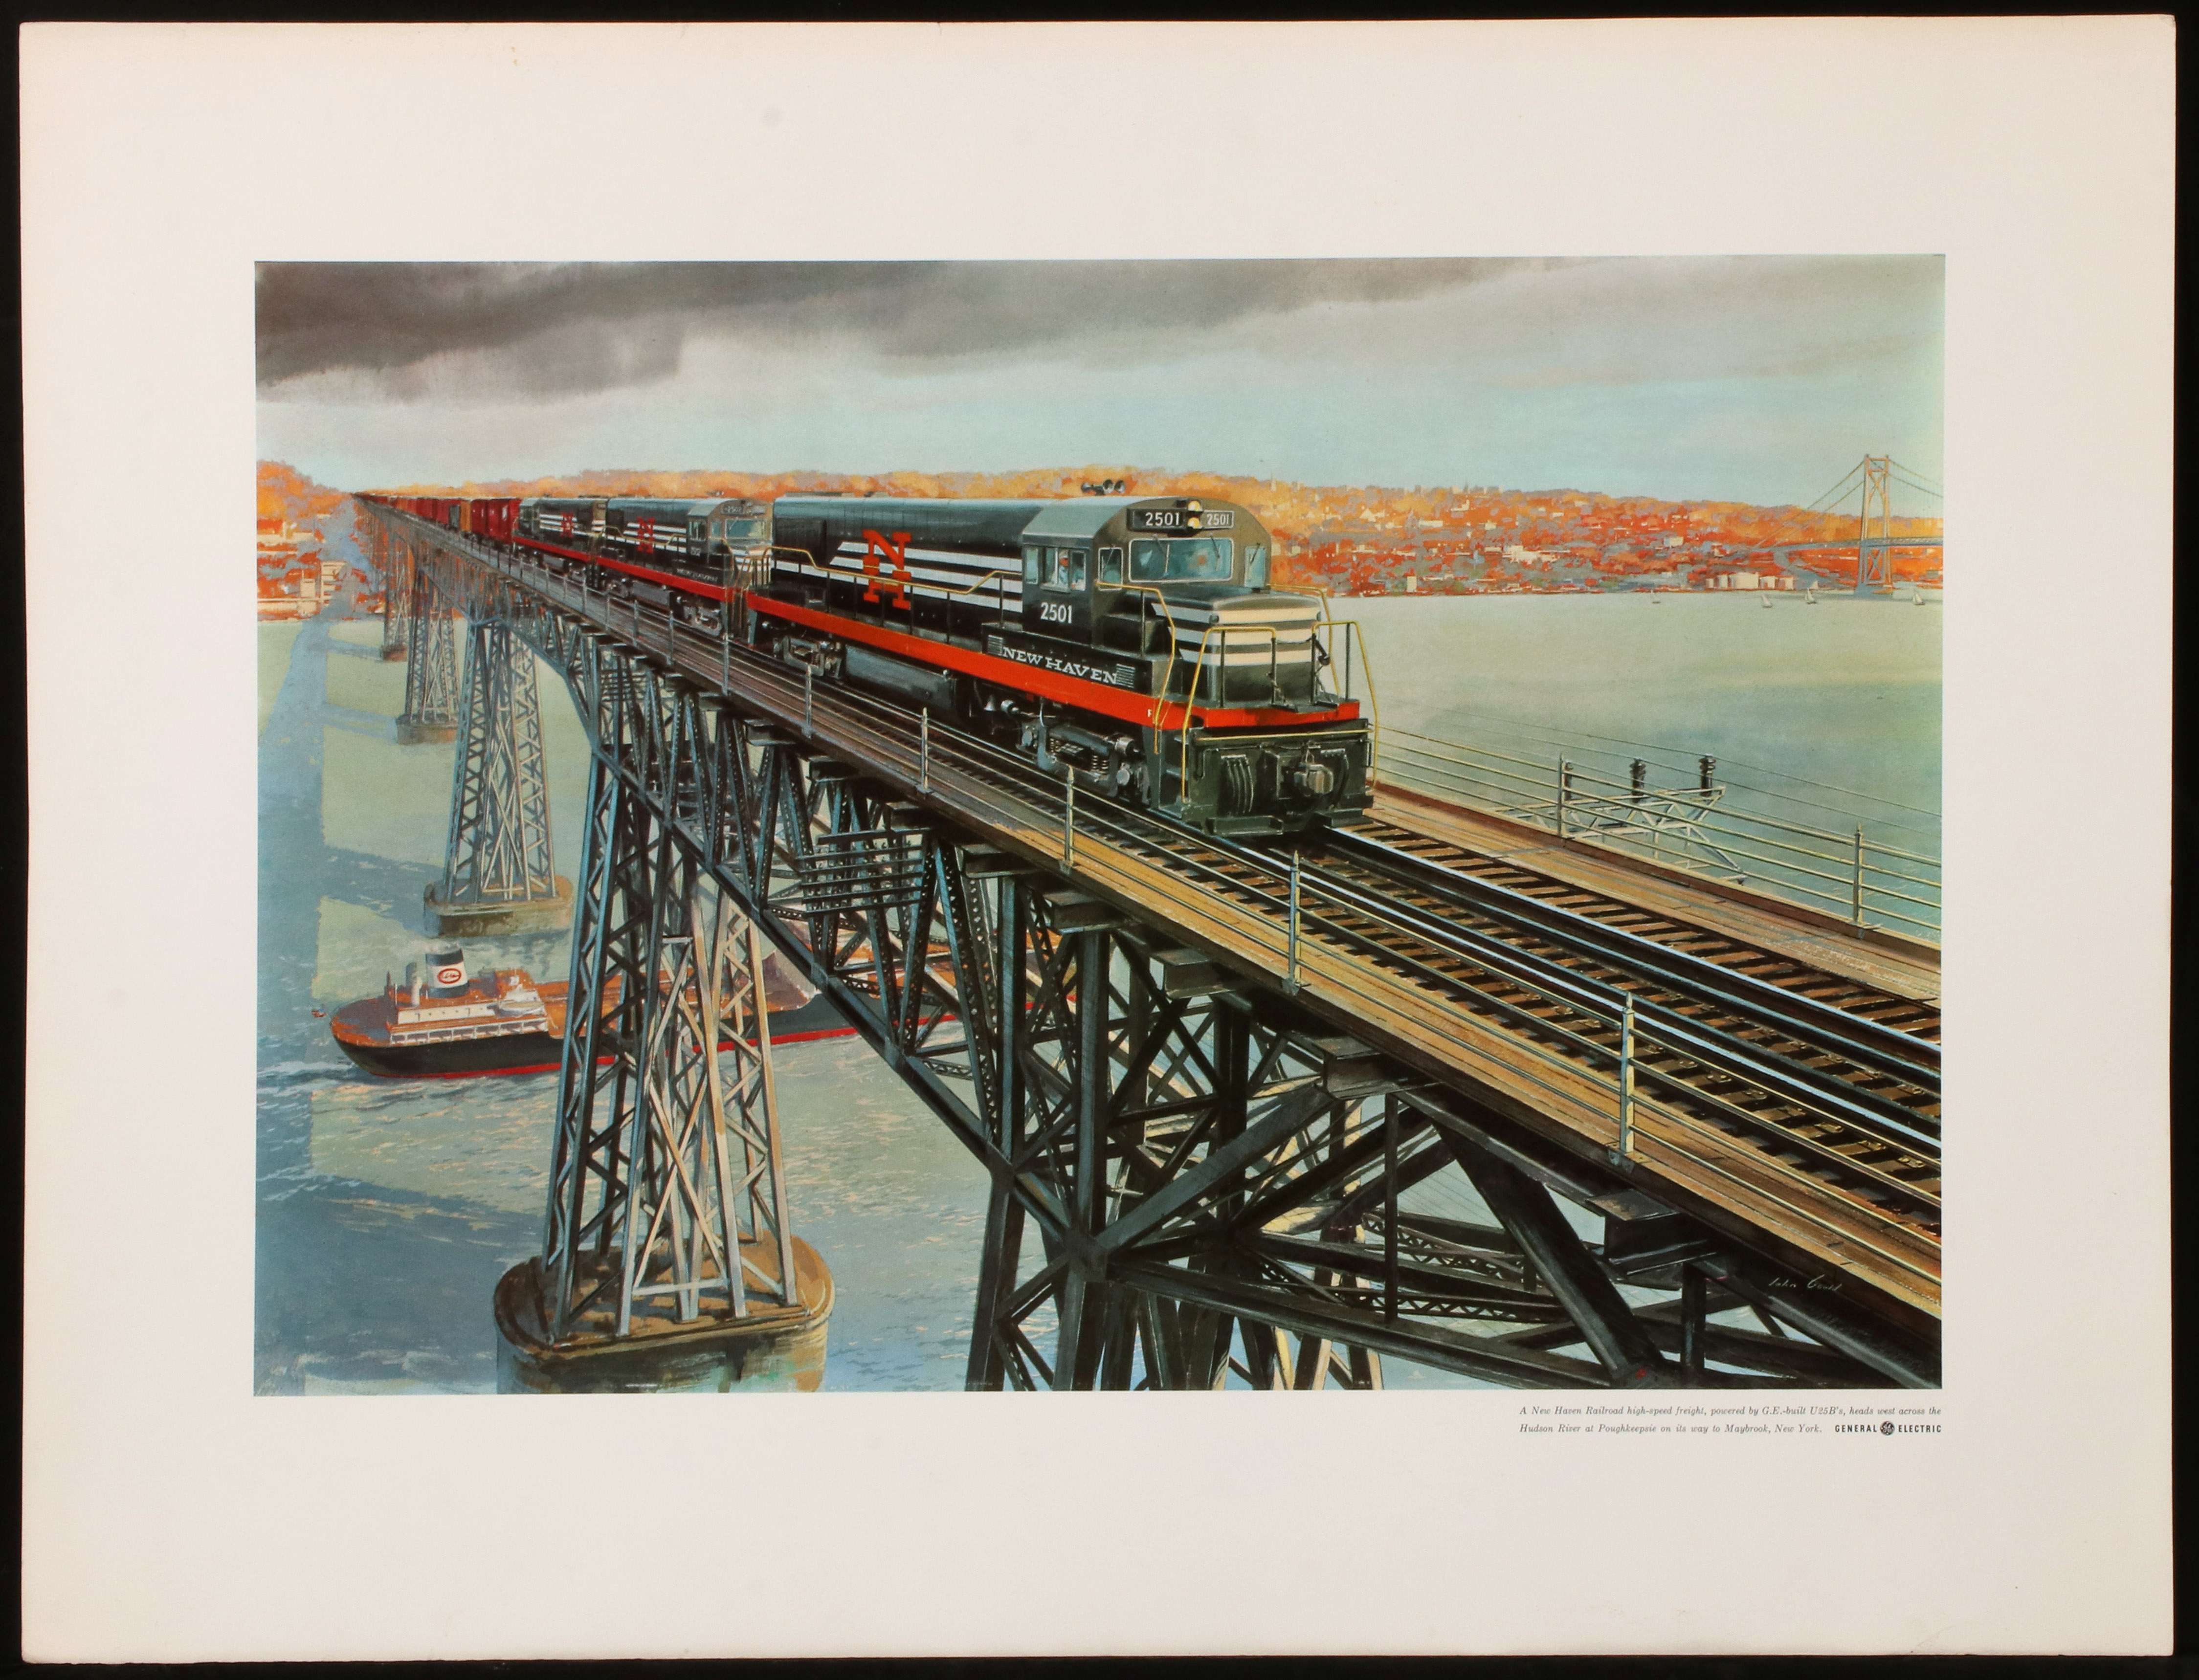 NEW HAVEN AND B&O RR PRINTS WITH G.E. LOCOMOTIVES